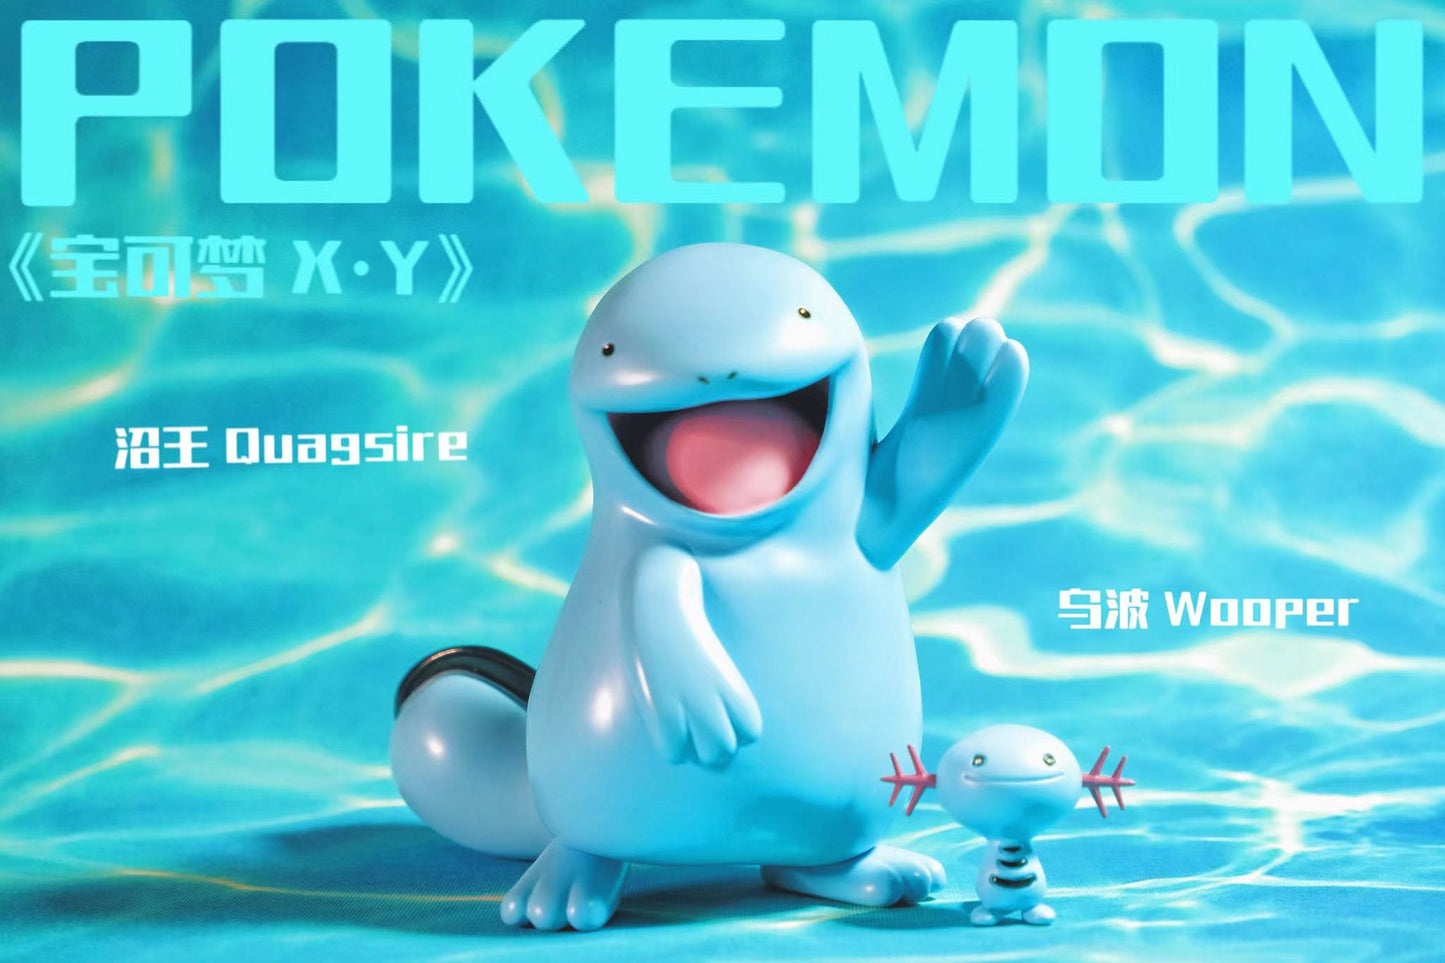 〖Sold Out〗Pokemon Scale World Wooper Quagsire  #194 #195 1:20 - SANG Studio